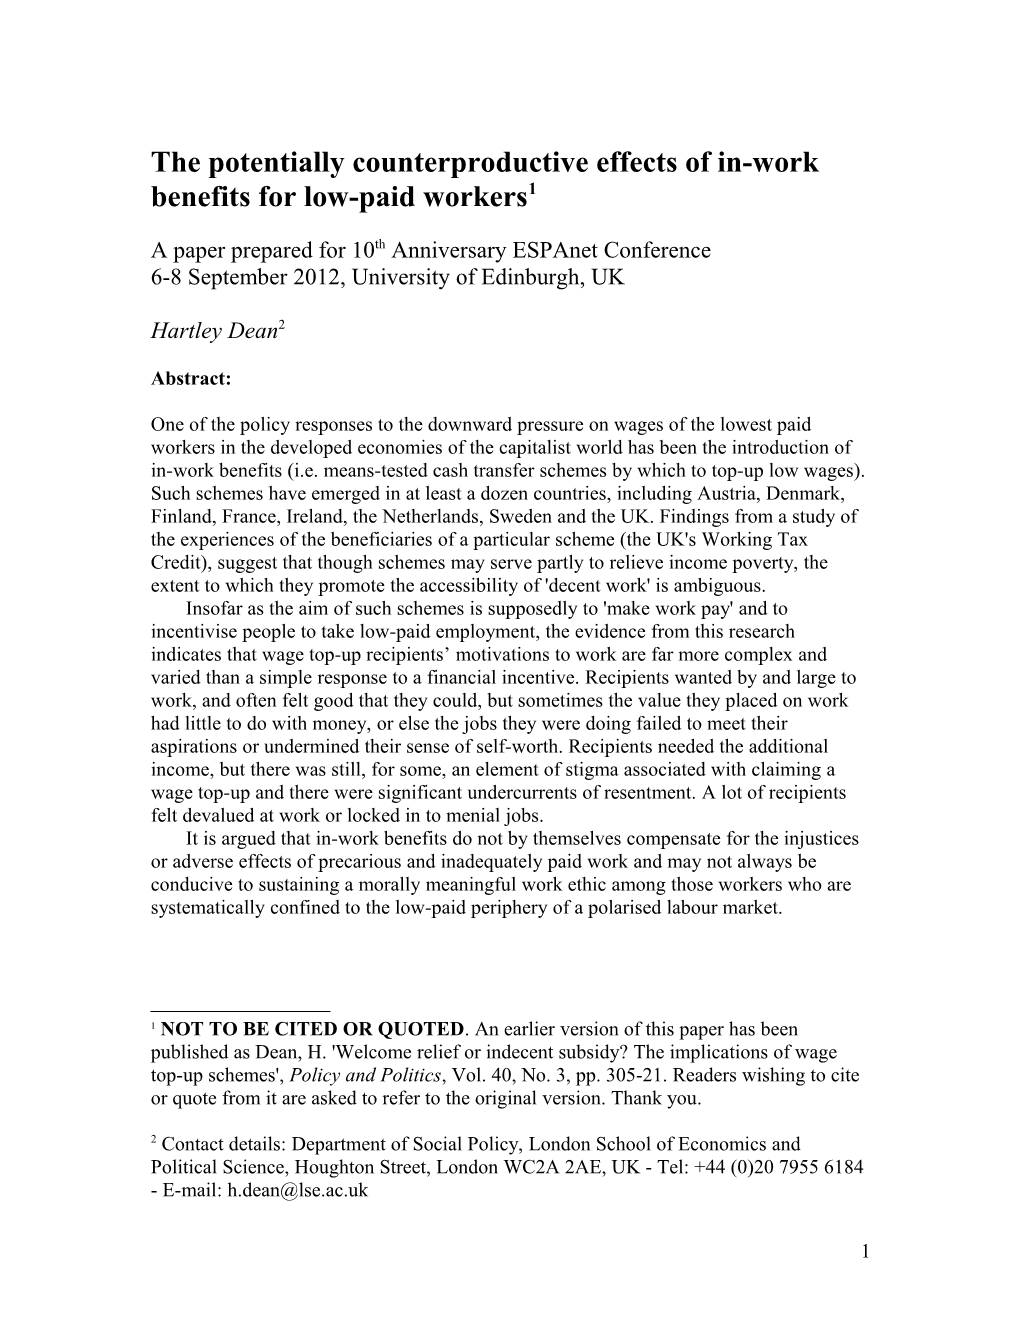 The Potentially Counterproductive Effects of In-Work Benefits for Low-Paid Workers 1